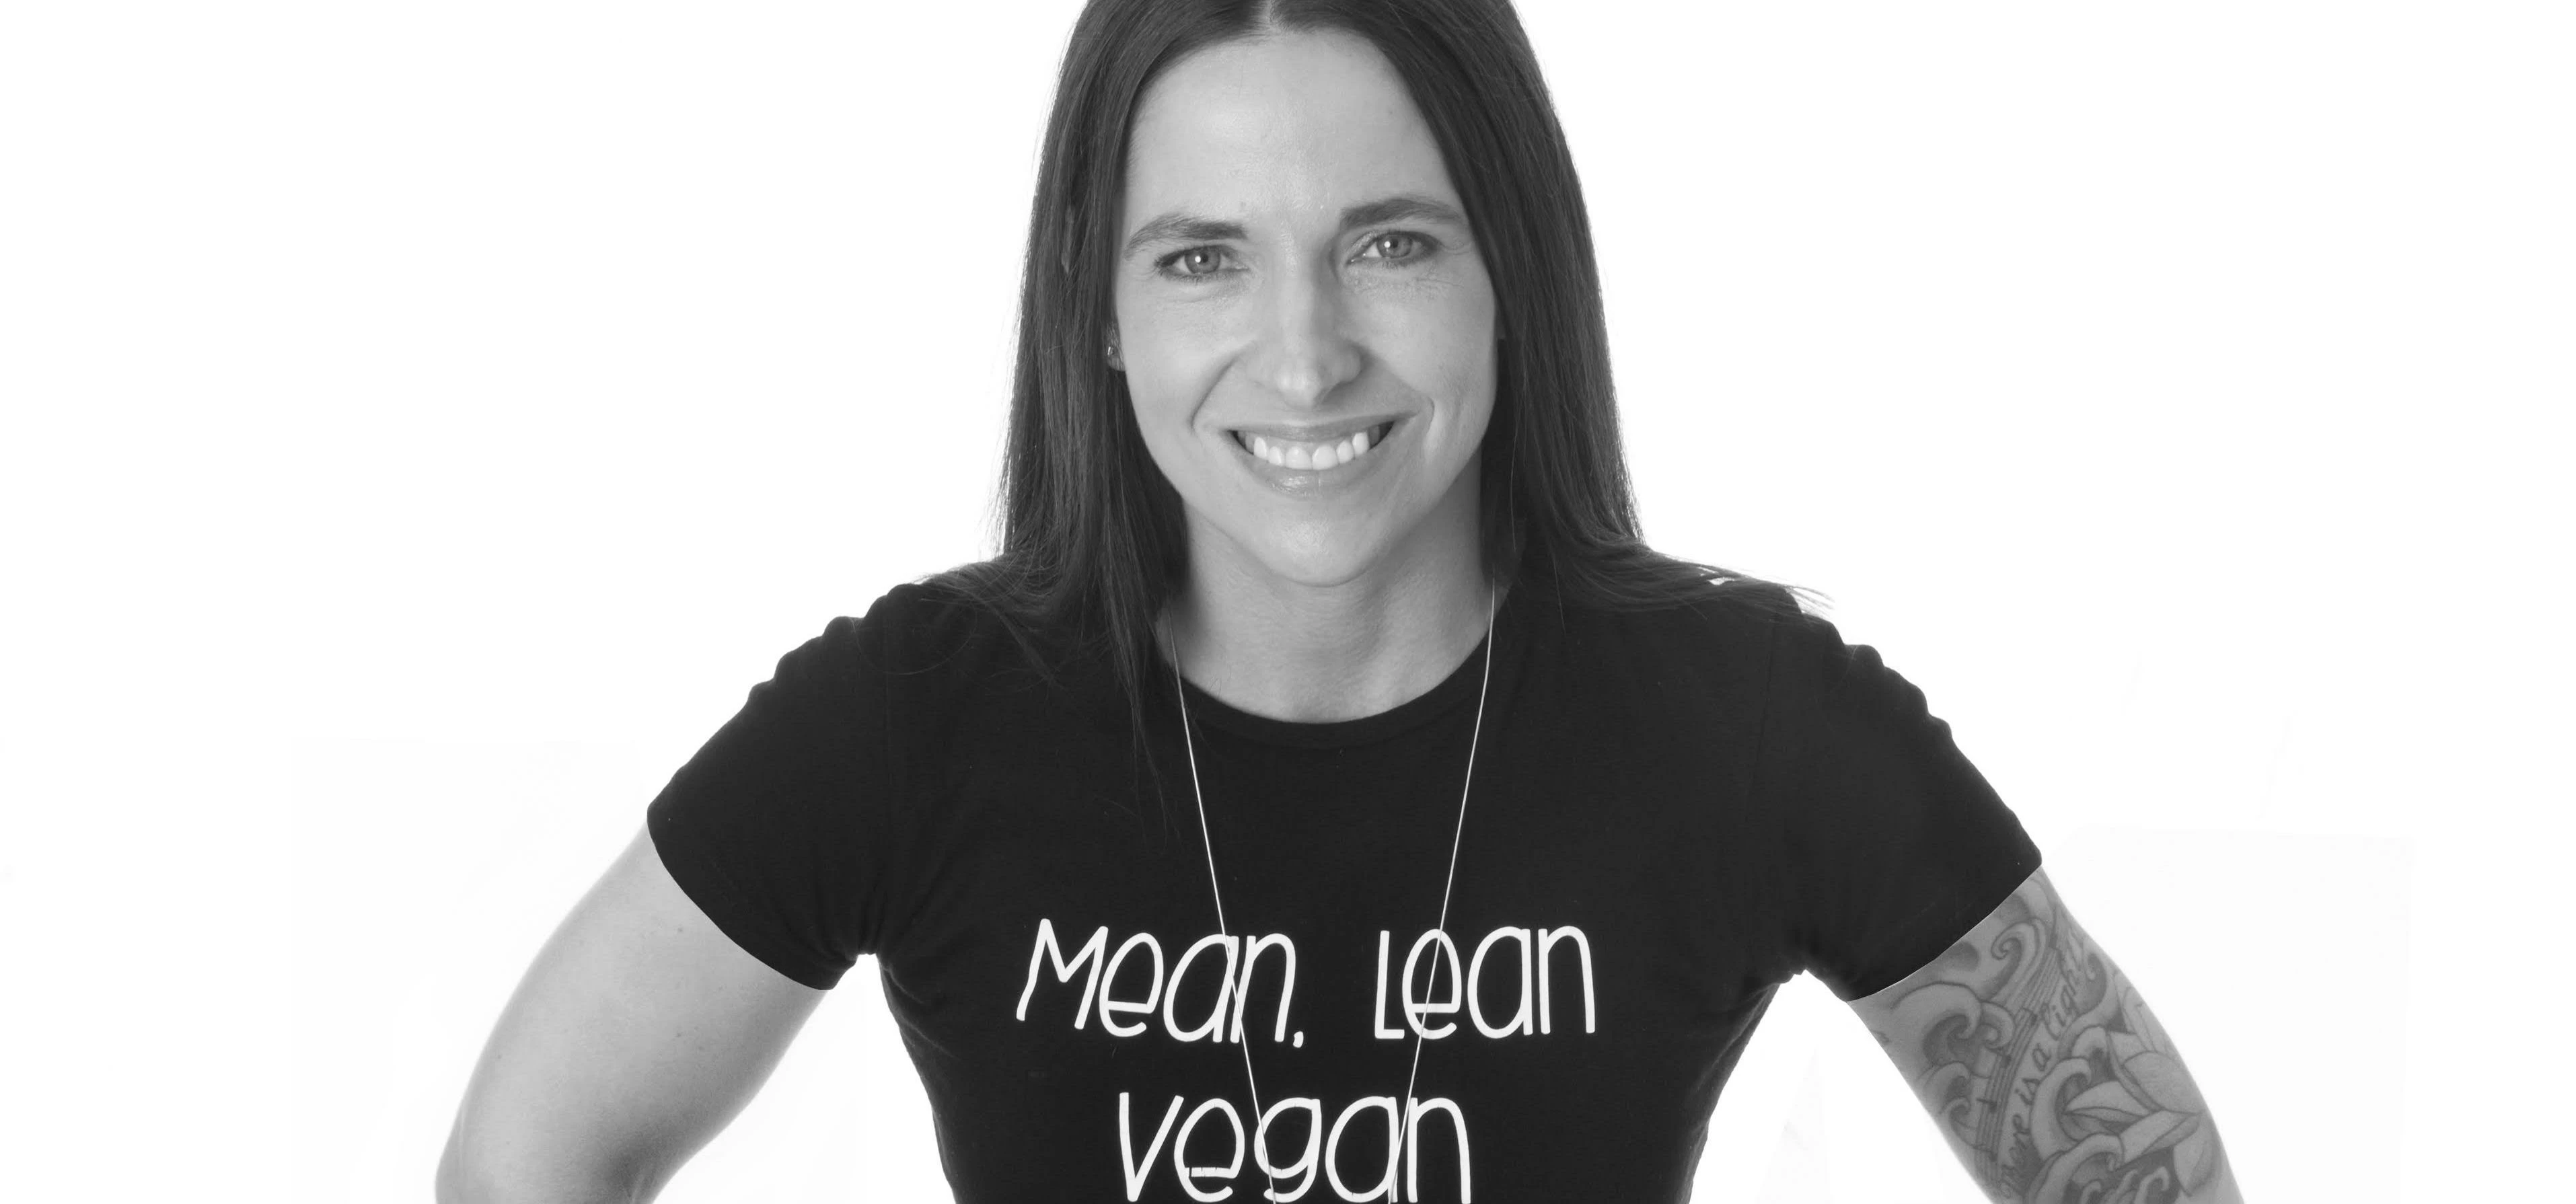 Bohemian Hippy provides a shop for vegan and animal rights branded merchandise and a platform for pe